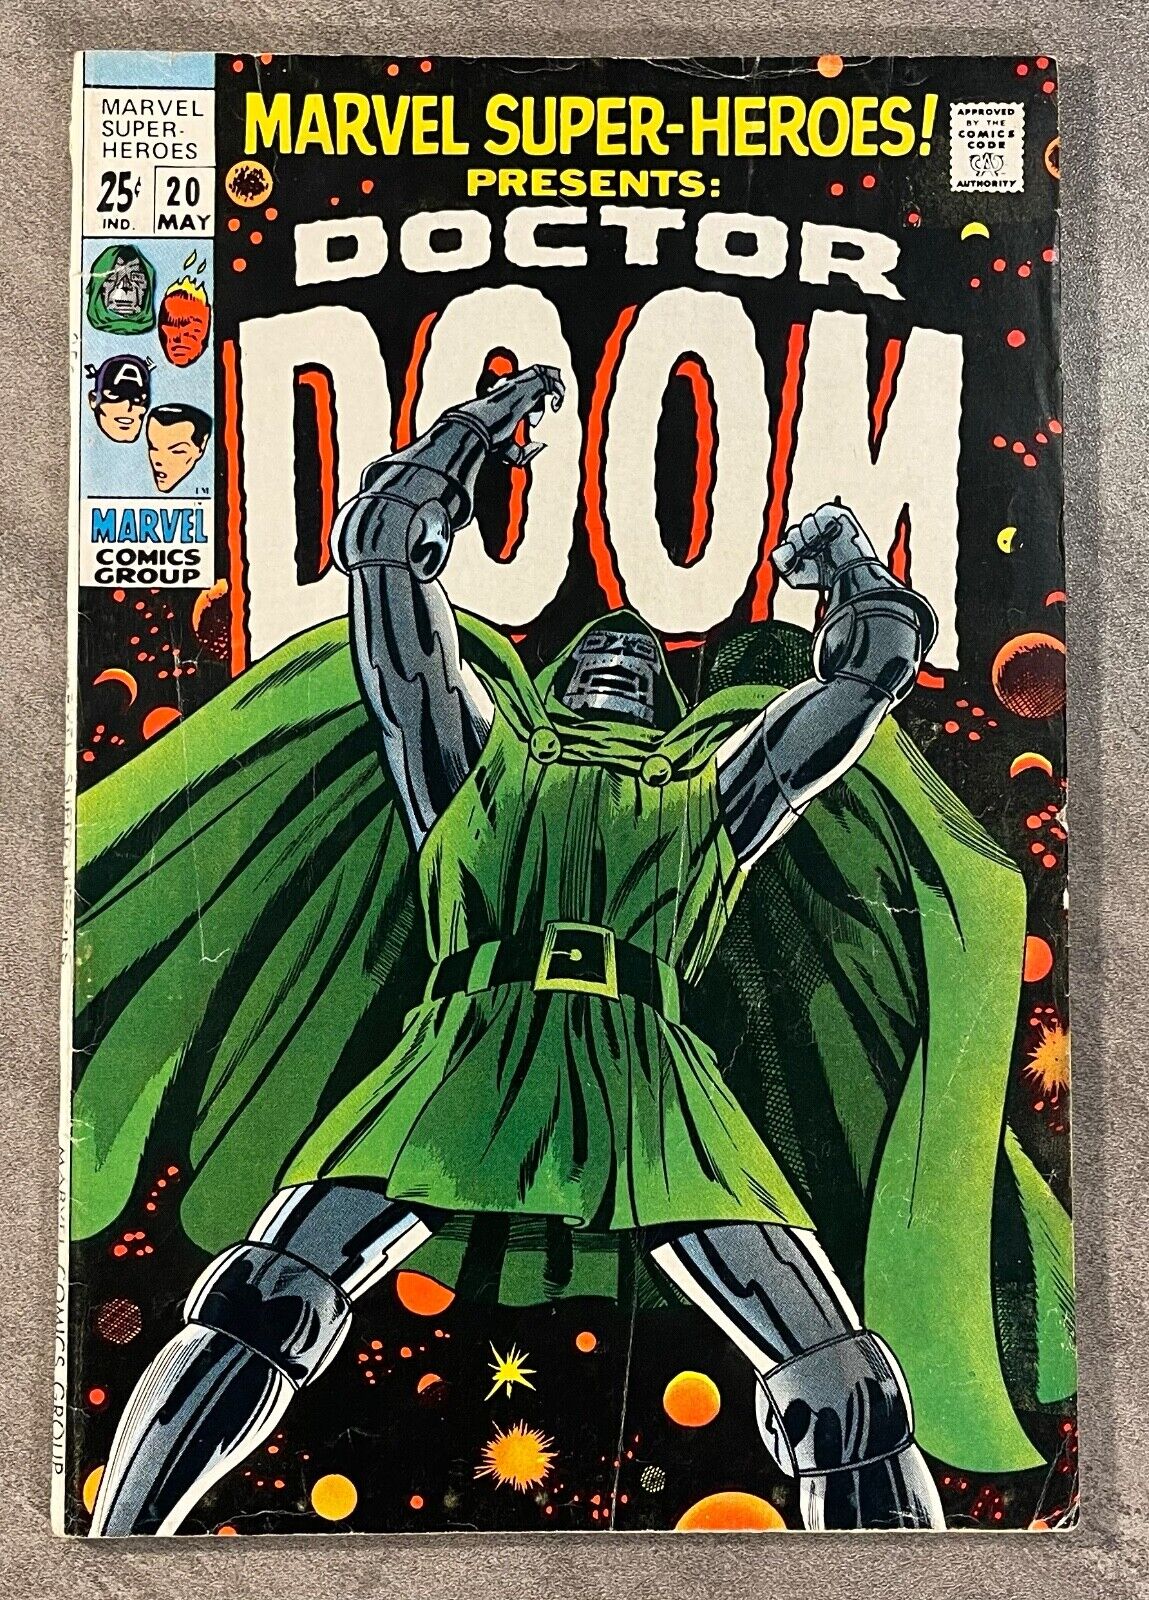 MARVEL SUPER-HEROES #20-MAY 1969-KEY-FIRST SOLO DOCTOR DOOM-CLASSIC G/VG